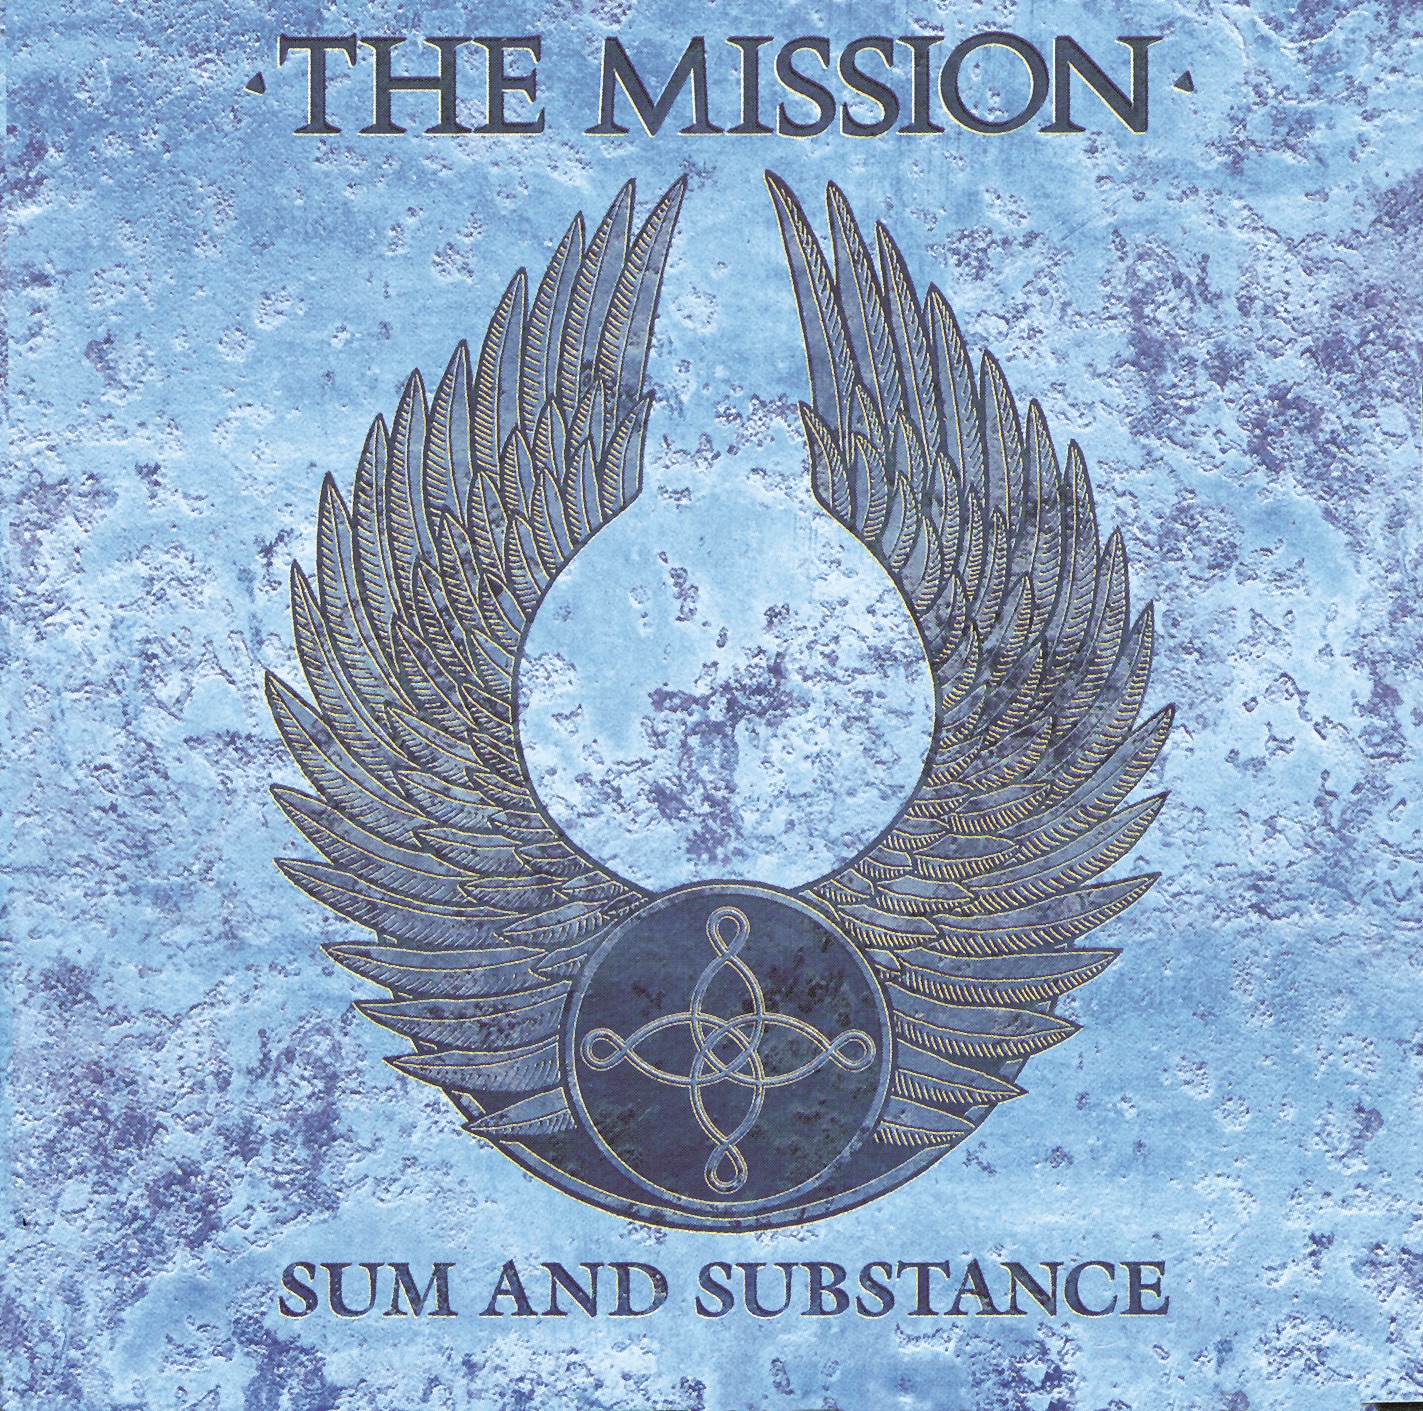 Art for Tower of Strength by The Mission